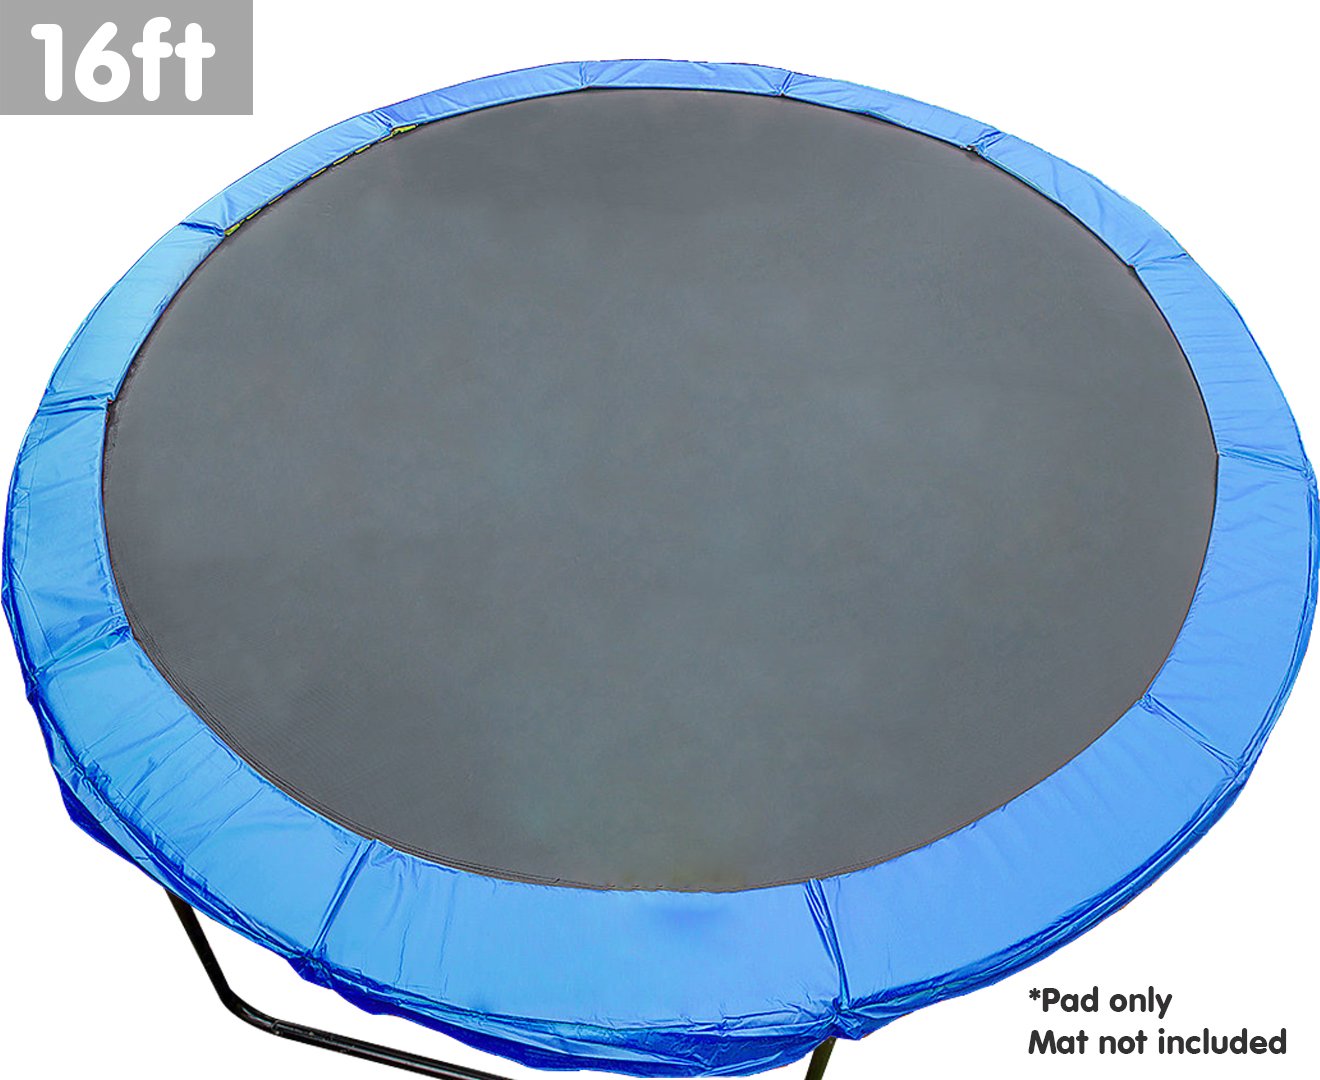 16ft Replacement Trampoline Pad Reinforced Outdoor Round Spring Cover 2